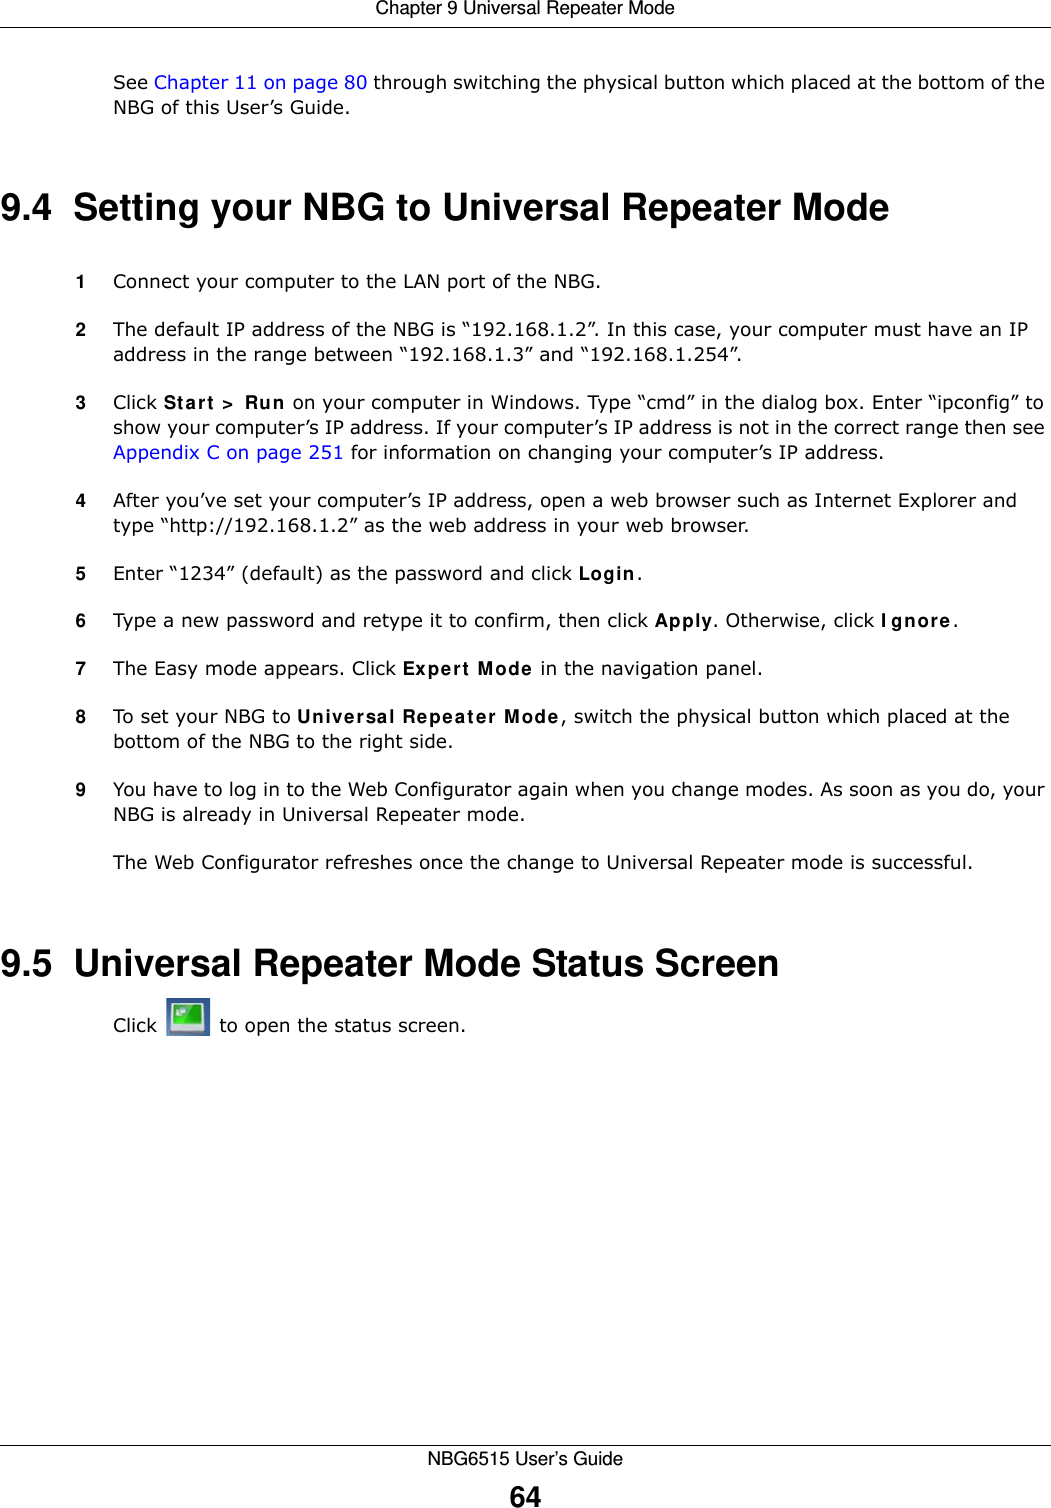 Chapter 9 Universal Repeater ModeNBG6515 User’s Guide64See Chapter 11 on page 80 through switching the physical button which placed at the bottom of the NBG of this User’s Guide.9.4  Setting your NBG to Universal Repeater Mode1Connect your computer to the LAN port of the NBG. 2The default IP address of the NBG is “192.168.1.2”. In this case, your computer must have an IP address in the range between “192.168.1.3” and “192.168.1.254”.3Click Start &gt; Run on your computer in Windows. Type “cmd” in the dialog box. Enter “ipconfig” to show your computer’s IP address. If your computer’s IP address is not in the correct range then see Appendix C on page 251 for information on changing your computer’s IP address.4After you’ve set your computer’s IP address, open a web browser such as Internet Explorer and type “http://192.168.1.2” as the web address in your web browser.5Enter “1234” (default) as the password and click Login.6Type a new password and retype it to confirm, then click Apply. Otherwise, click Ignore.7The Easy mode appears. Click Expert Mode in the navigation panel.8To set your NBG to Universal Repeater Mode, switch the physical button which placed at the bottom of the NBG to the right side.9You have to log in to the Web Configurator again when you change modes. As soon as you do, your NBG is already in Universal Repeater mode.The Web Configurator refreshes once the change to Universal Repeater mode is successful.9.5  Universal Repeater Mode Status ScreenClick   to open the status screen. 